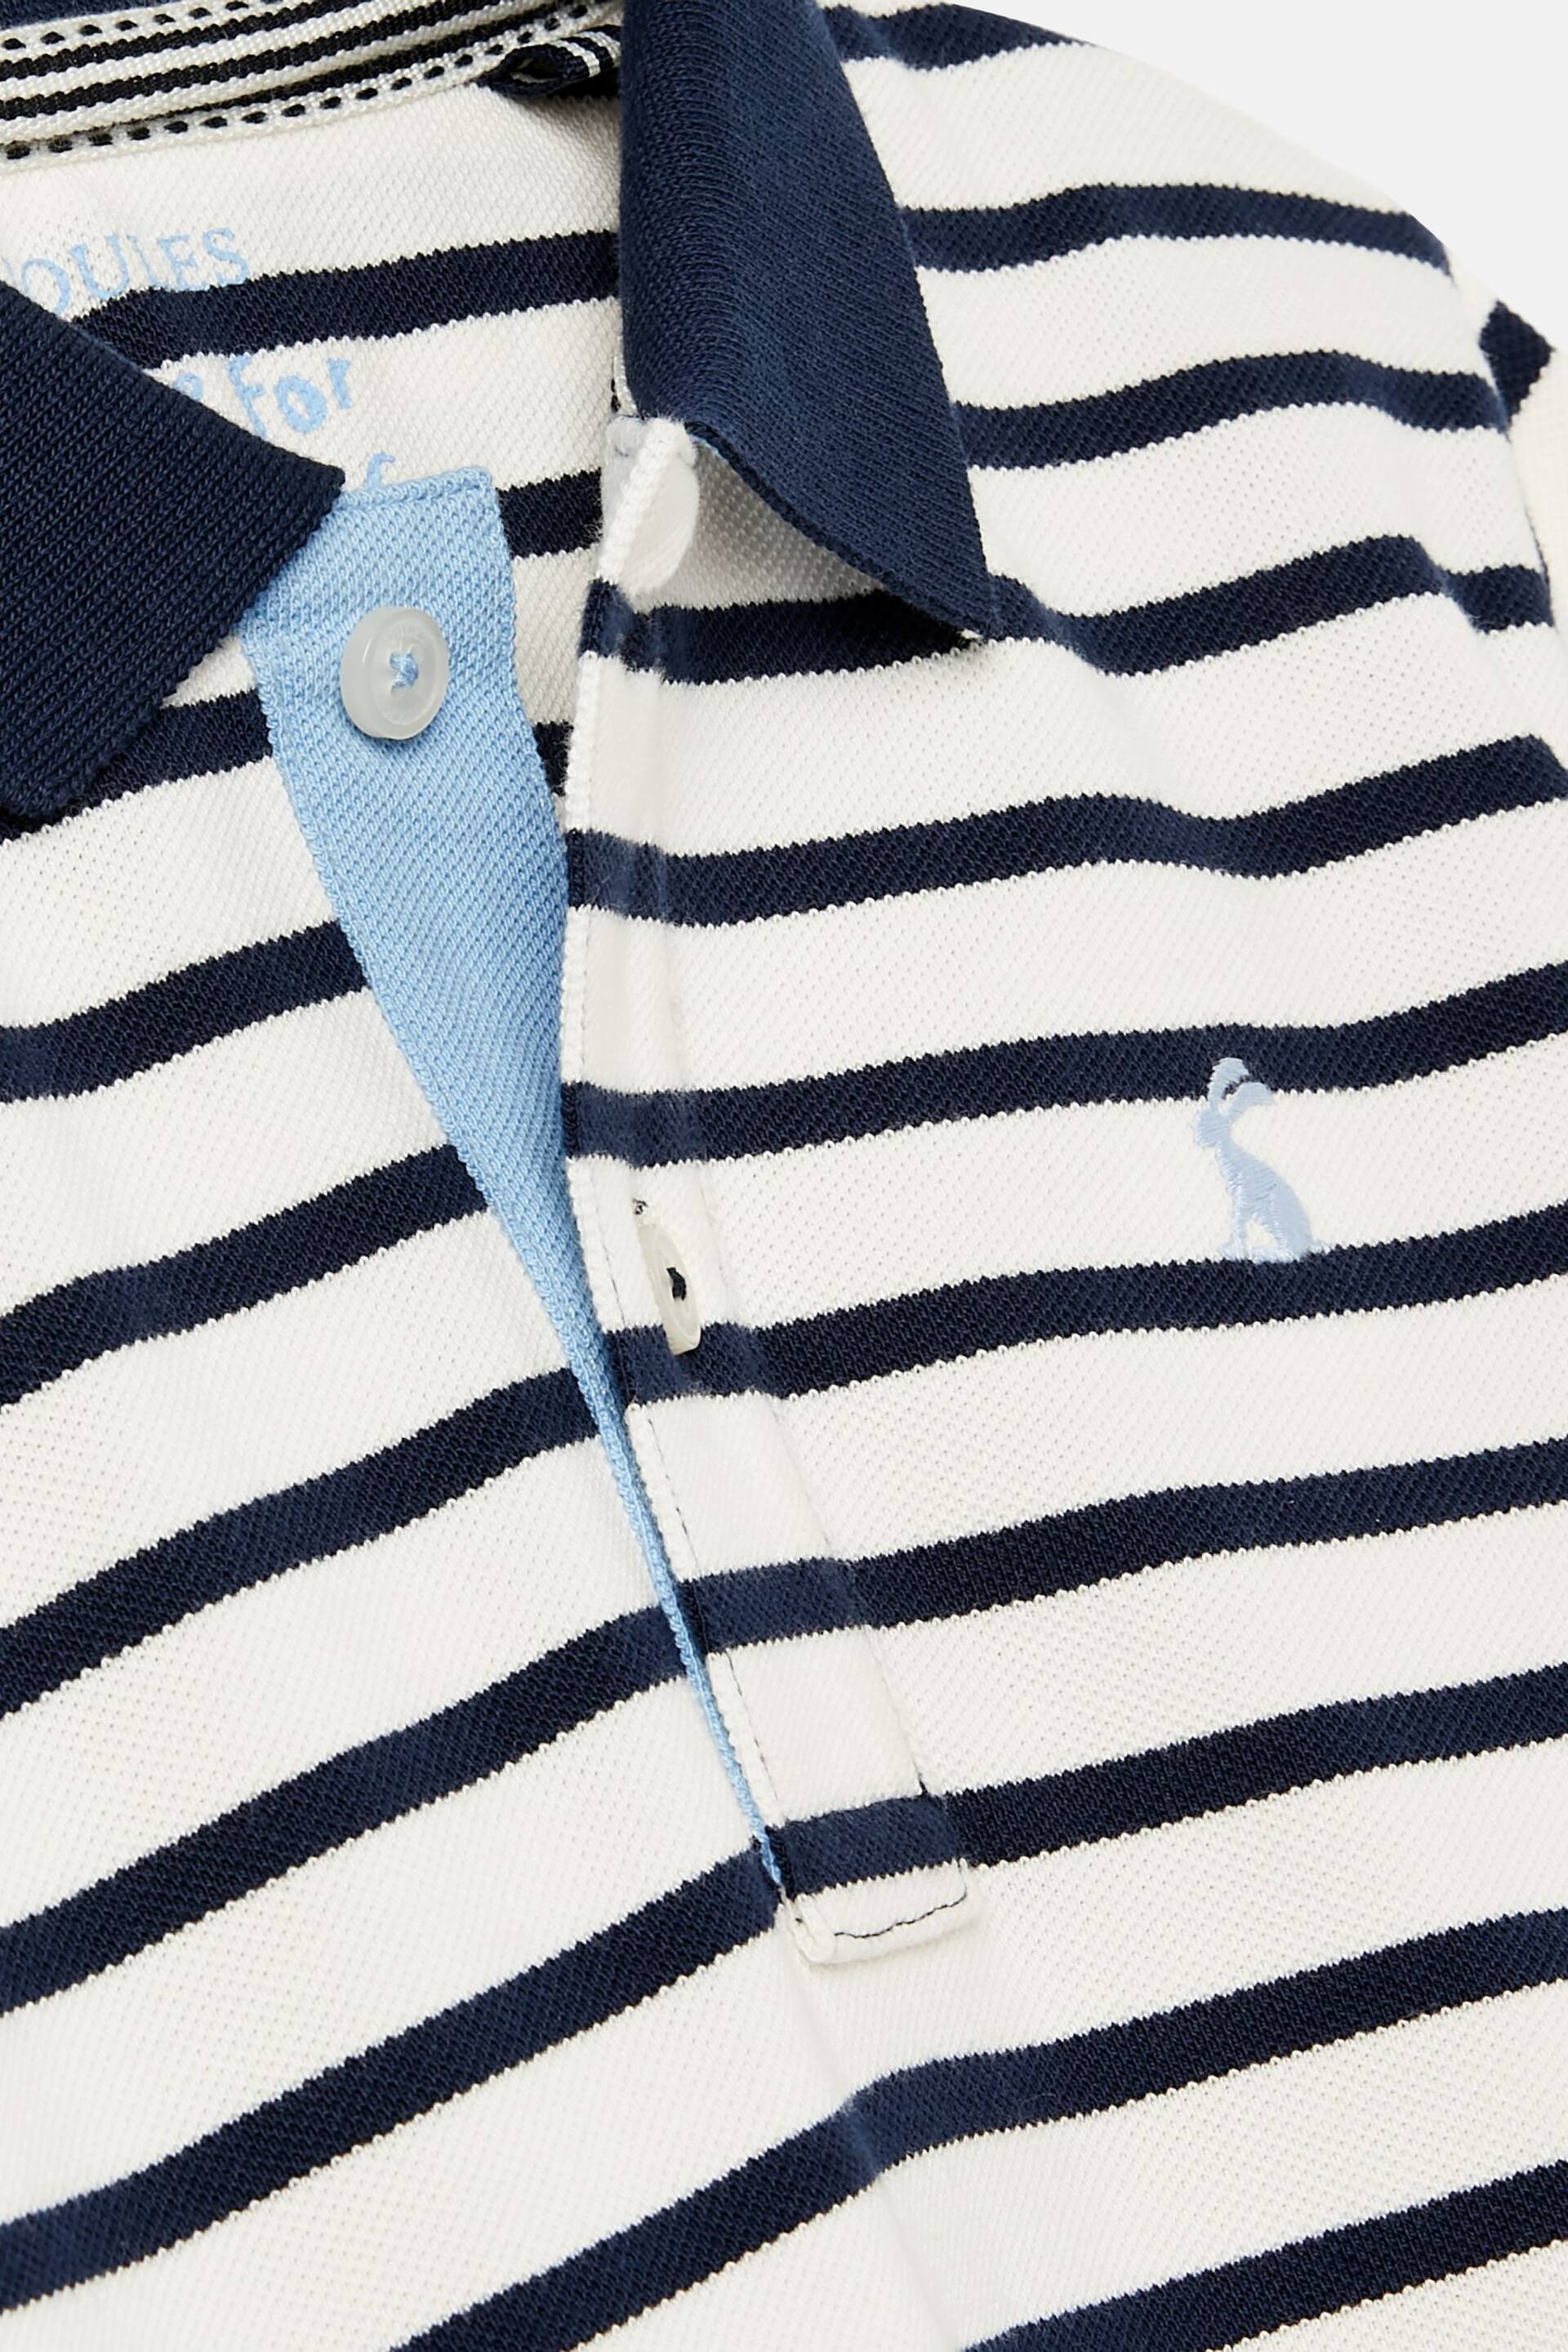 Joules Filbert Navy Blue Striped Pique Cotton Polo Shirt - Image 5 of 5